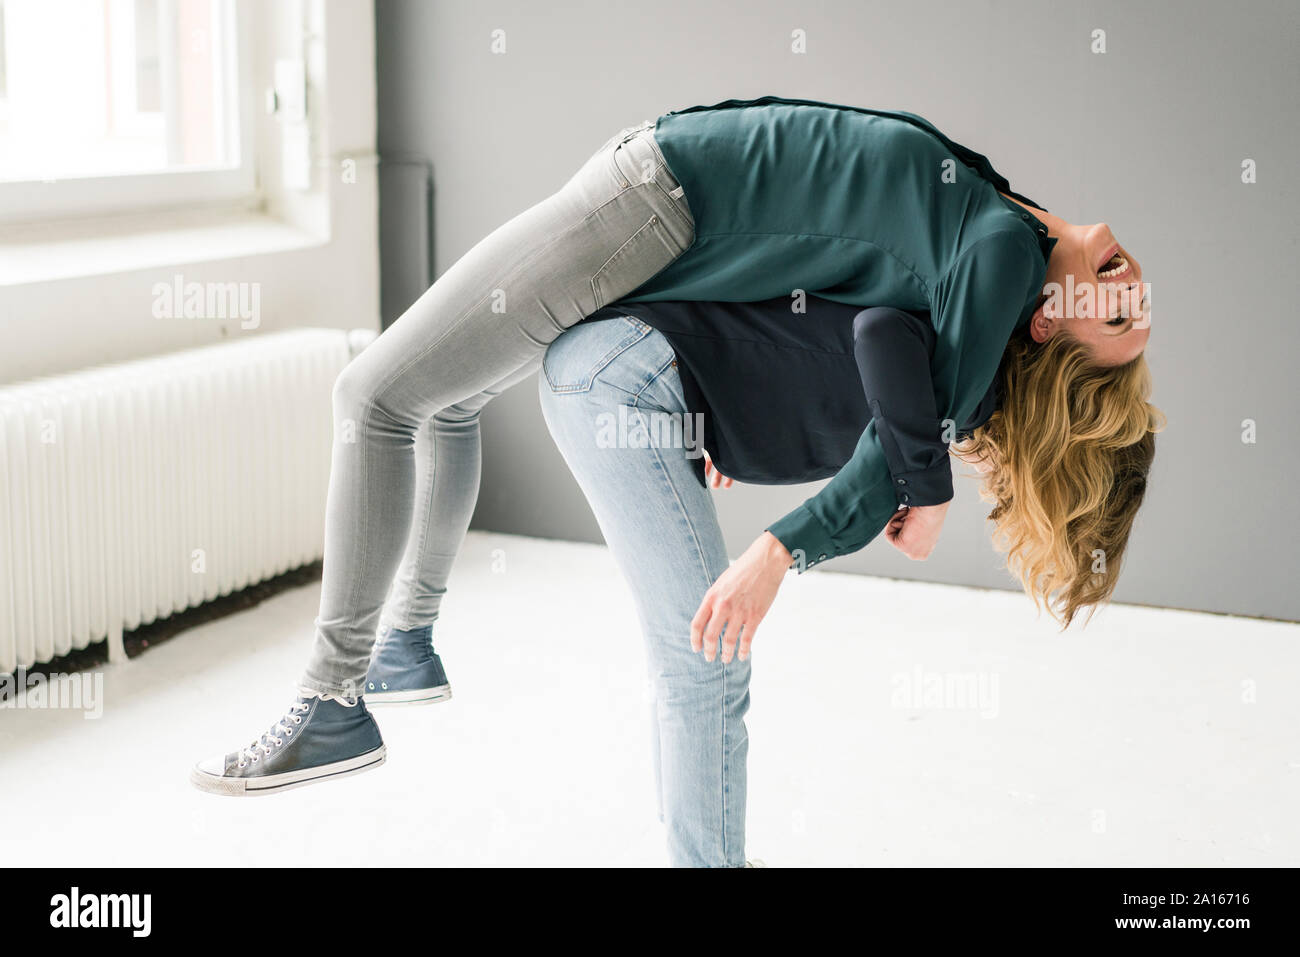 Two young women supporting each other playfully Stock Photo